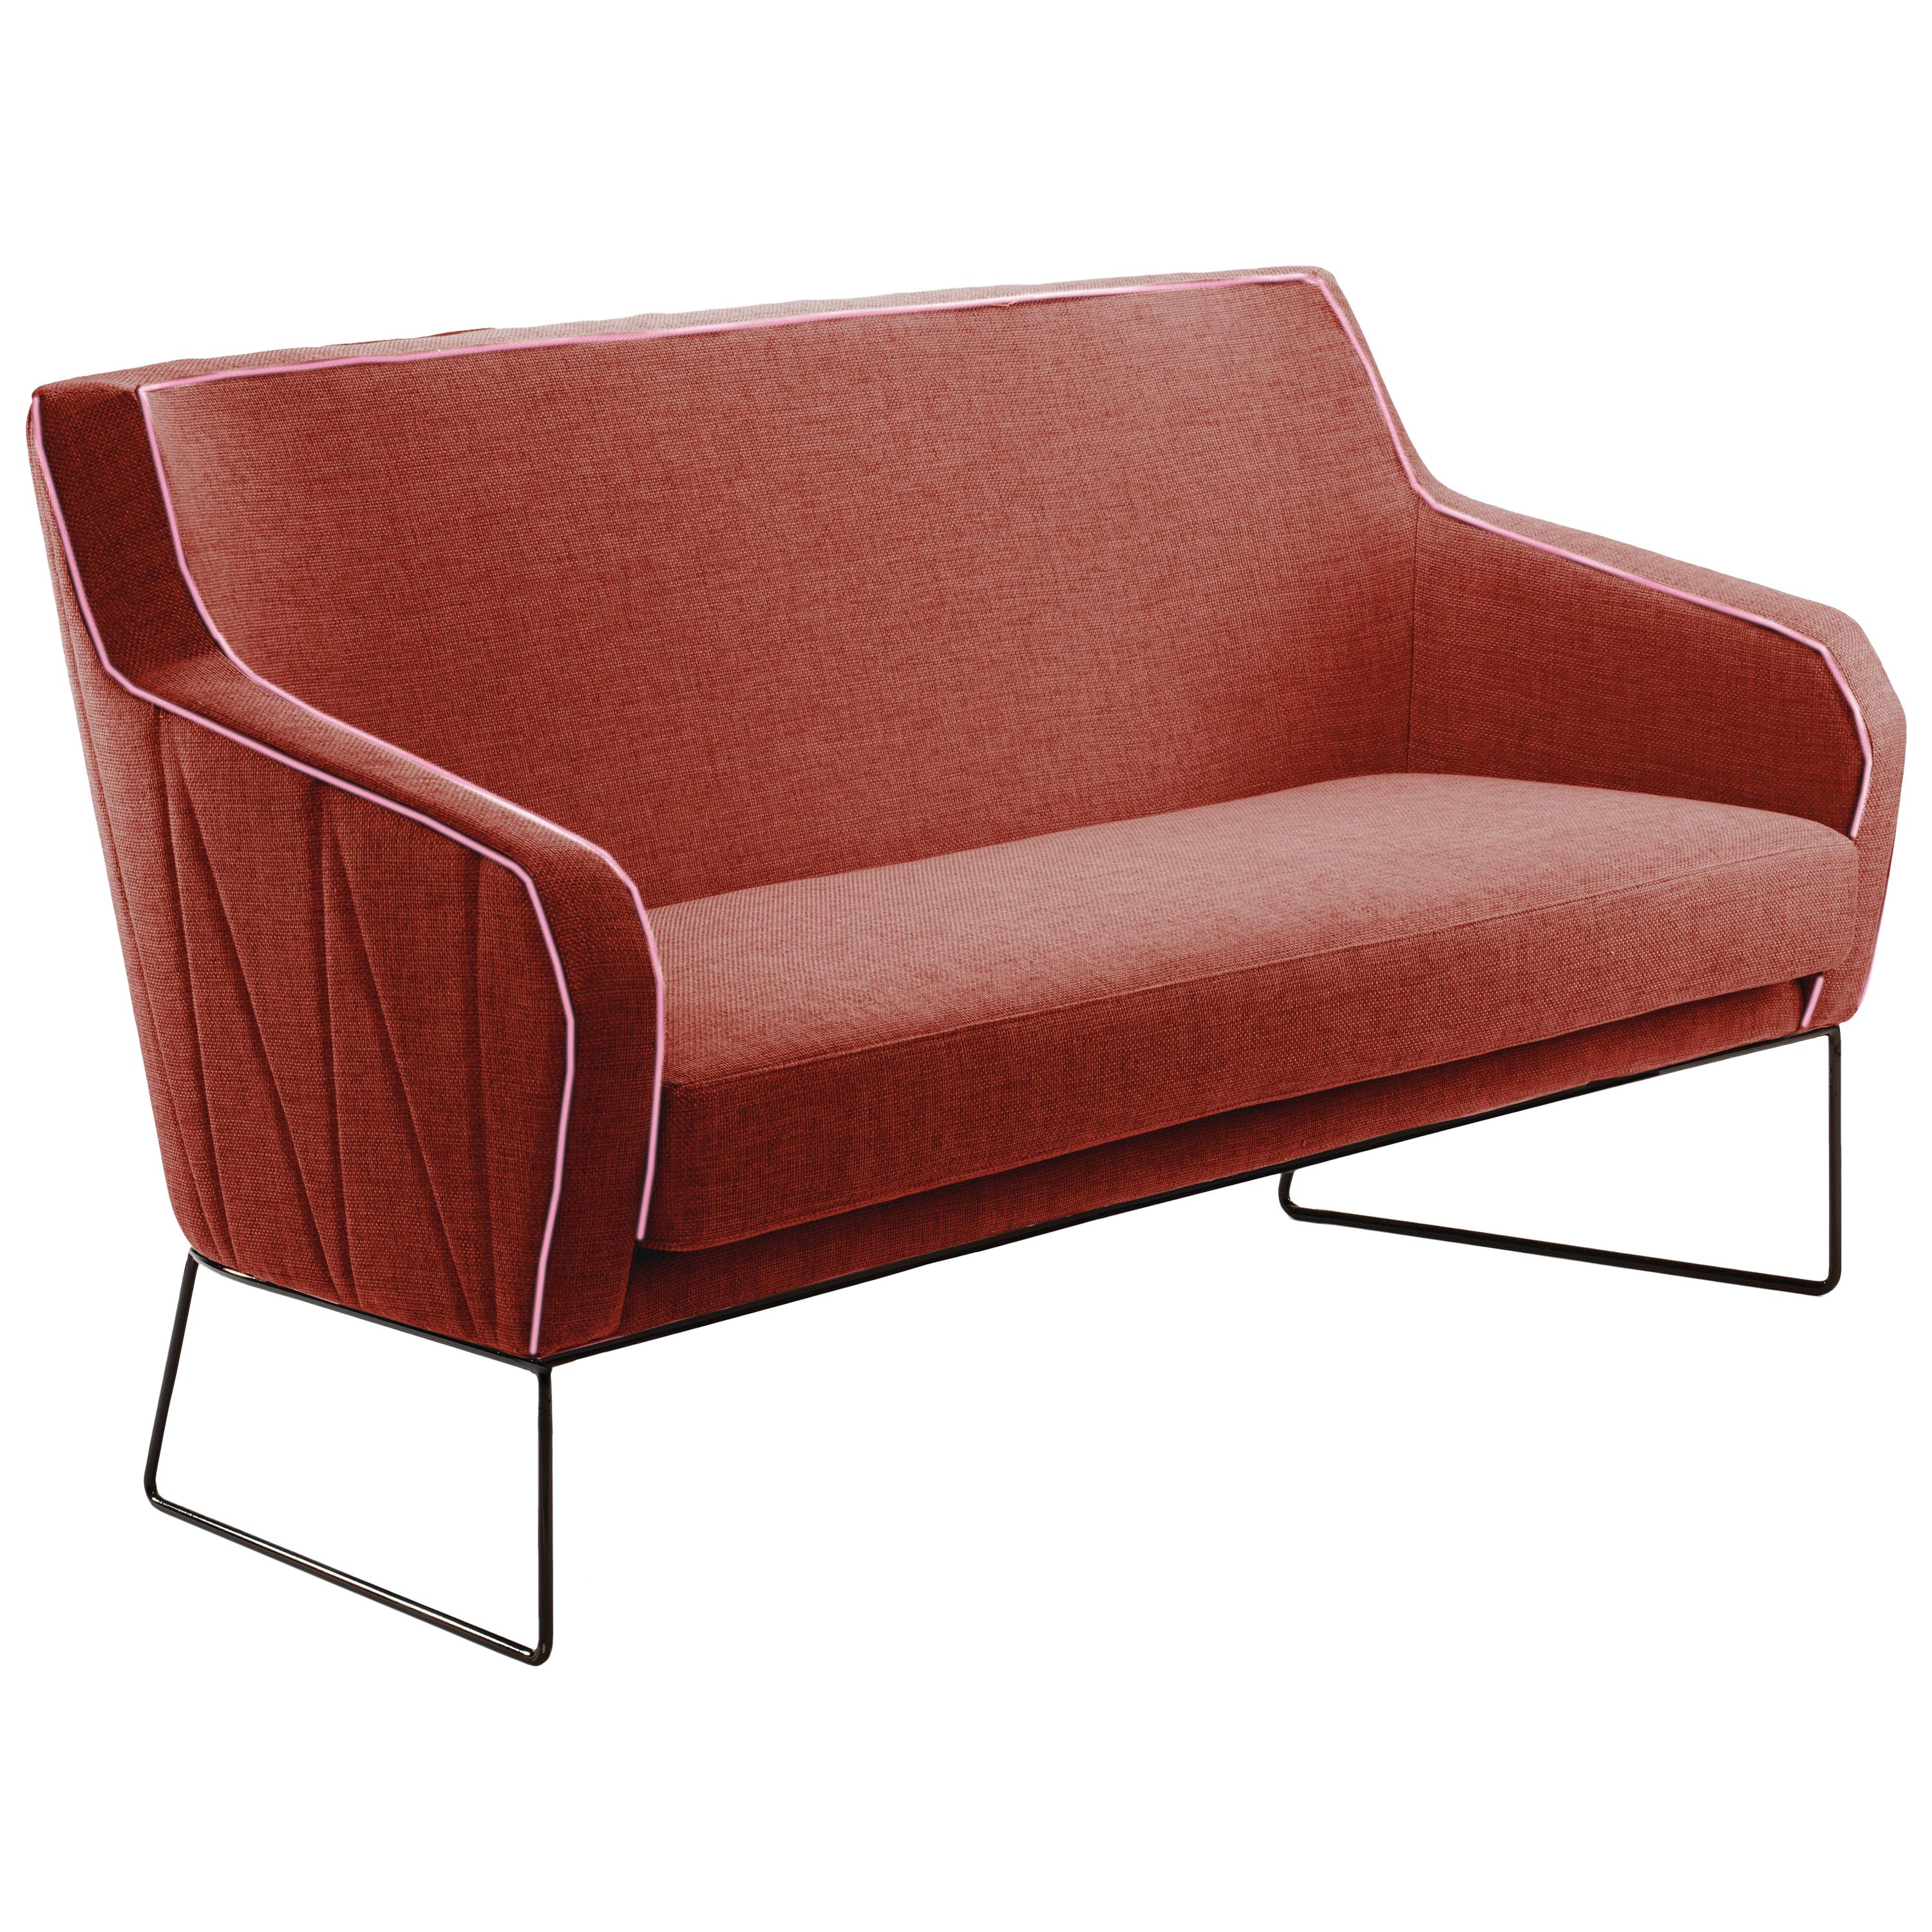 Croix Settee 2-Seat in Smooth Tobacco and Smooth Shell piping